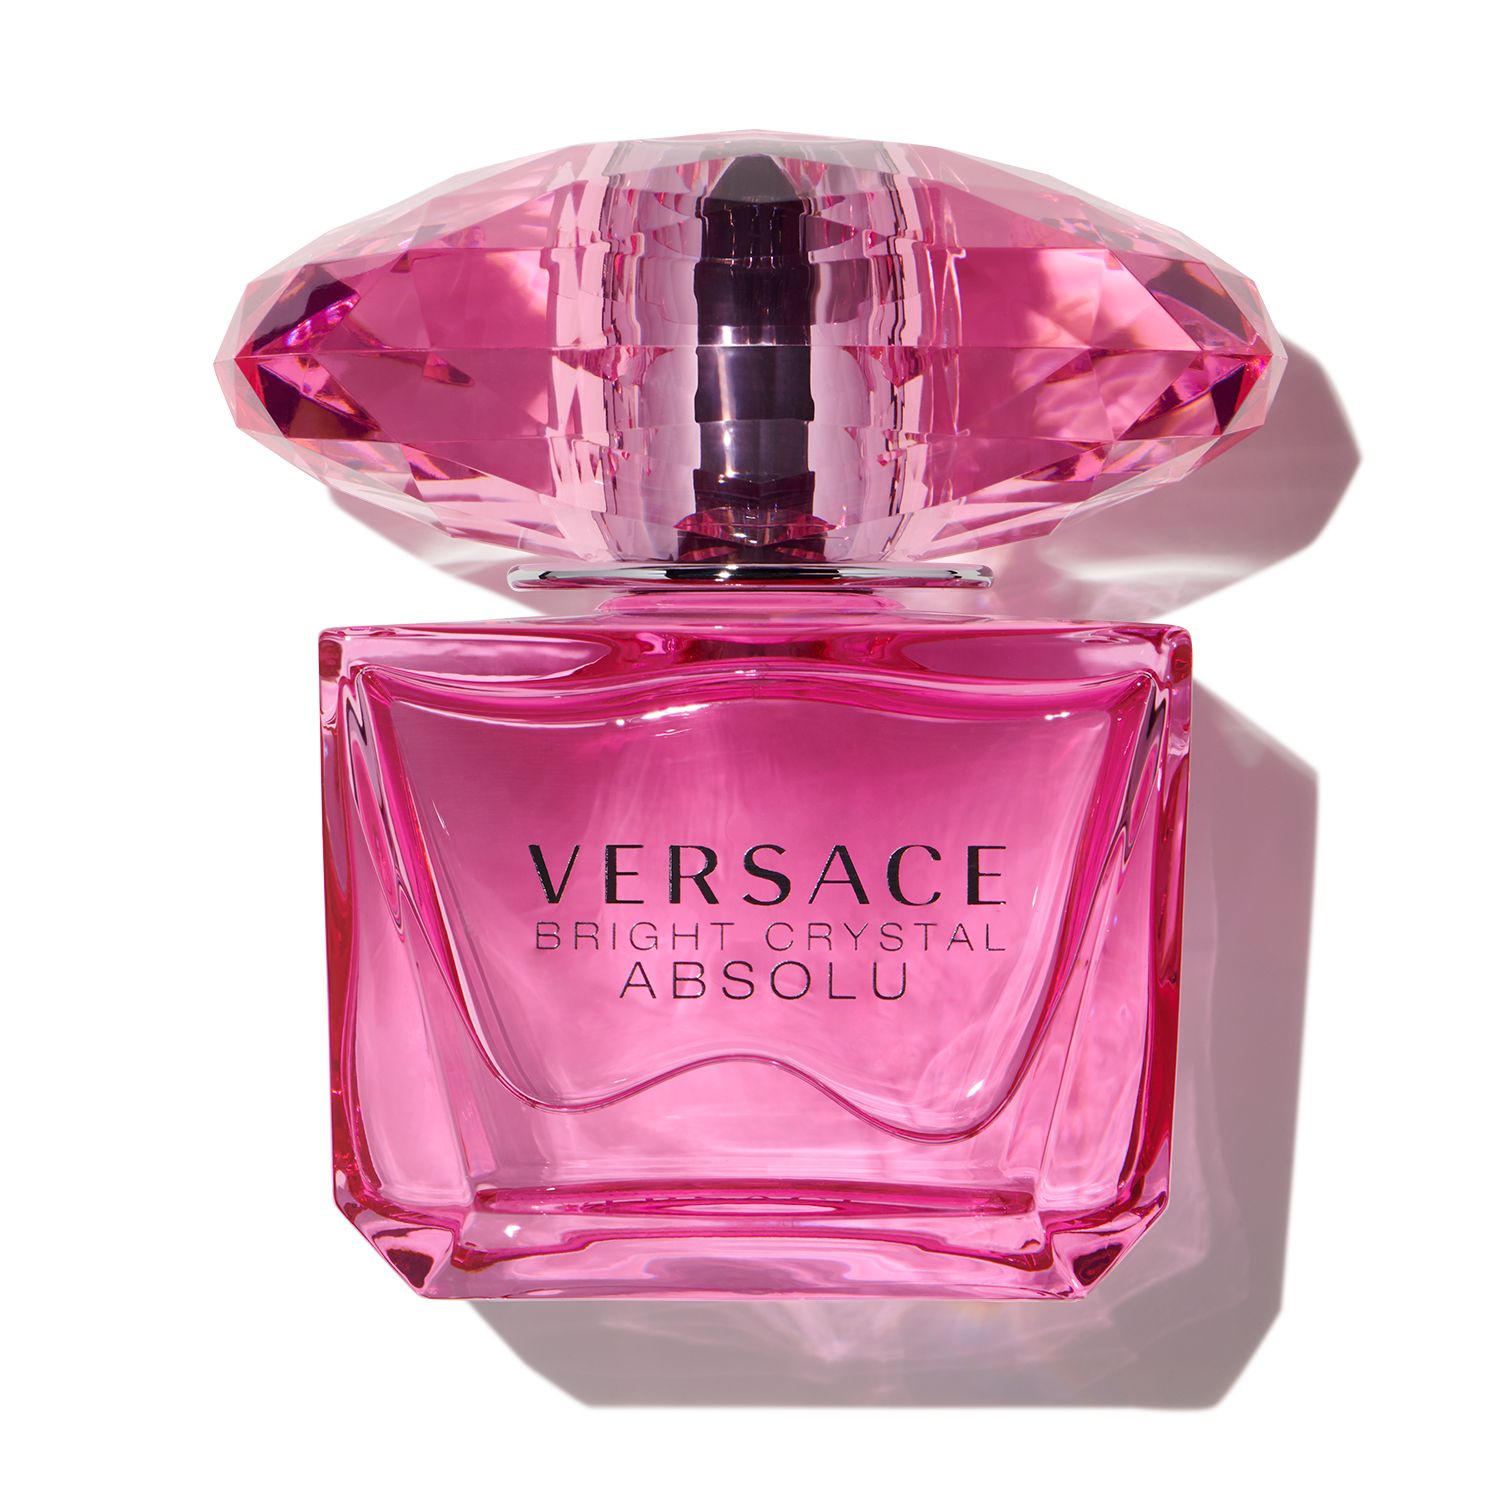 Get Versace Bright Crystal Absolu for $16.95 at Scentbird